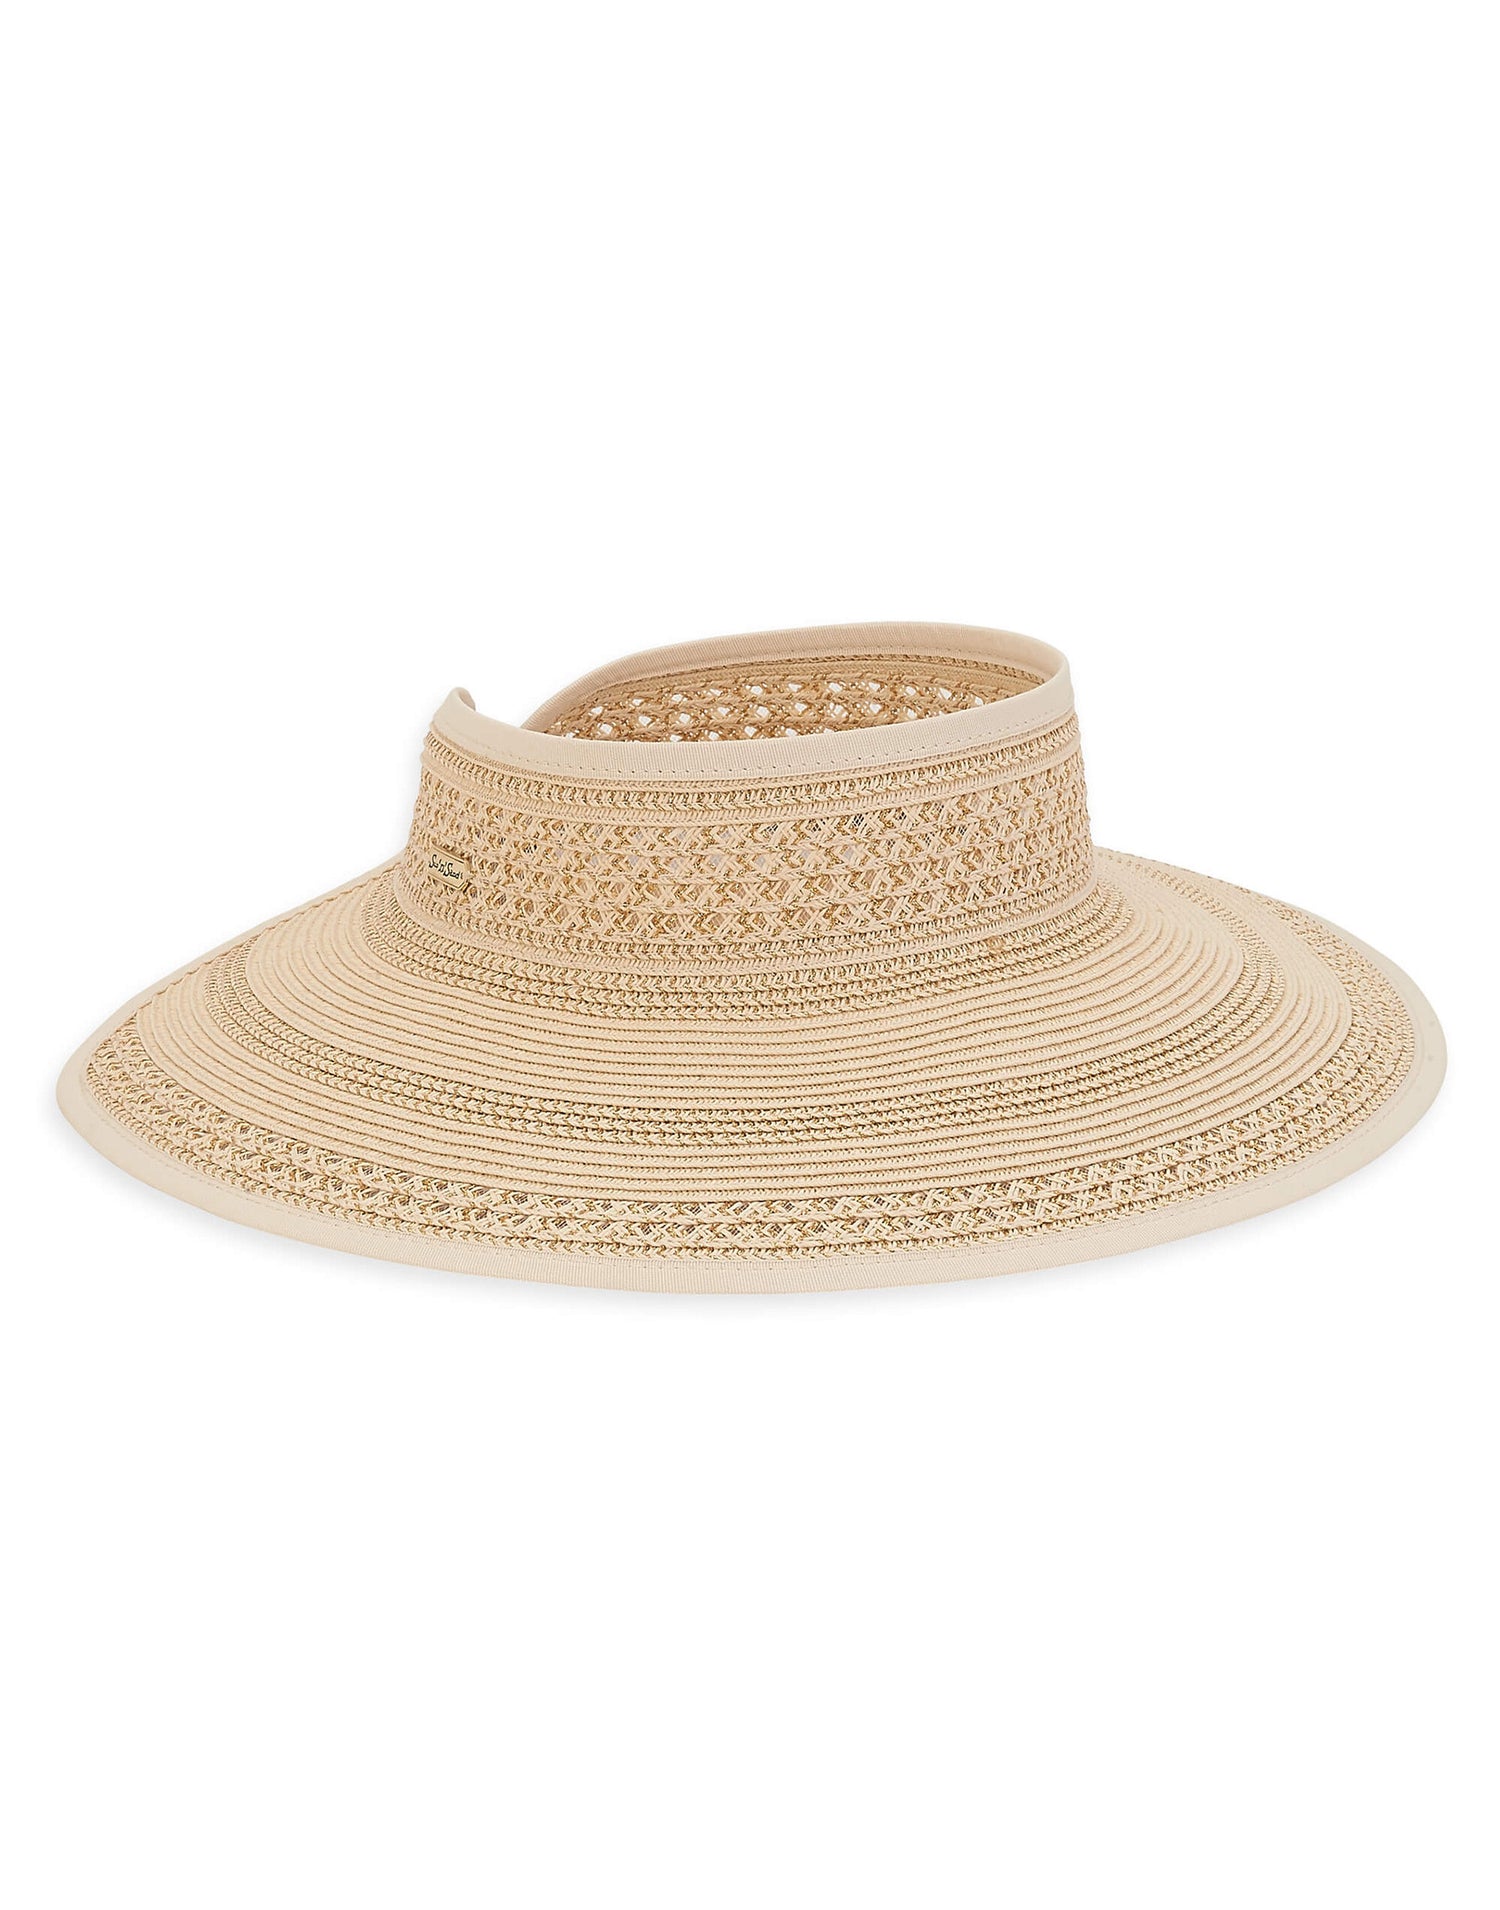 Paper Braid Wide Brim Visor by Sun N Sand in Natural - Angled View